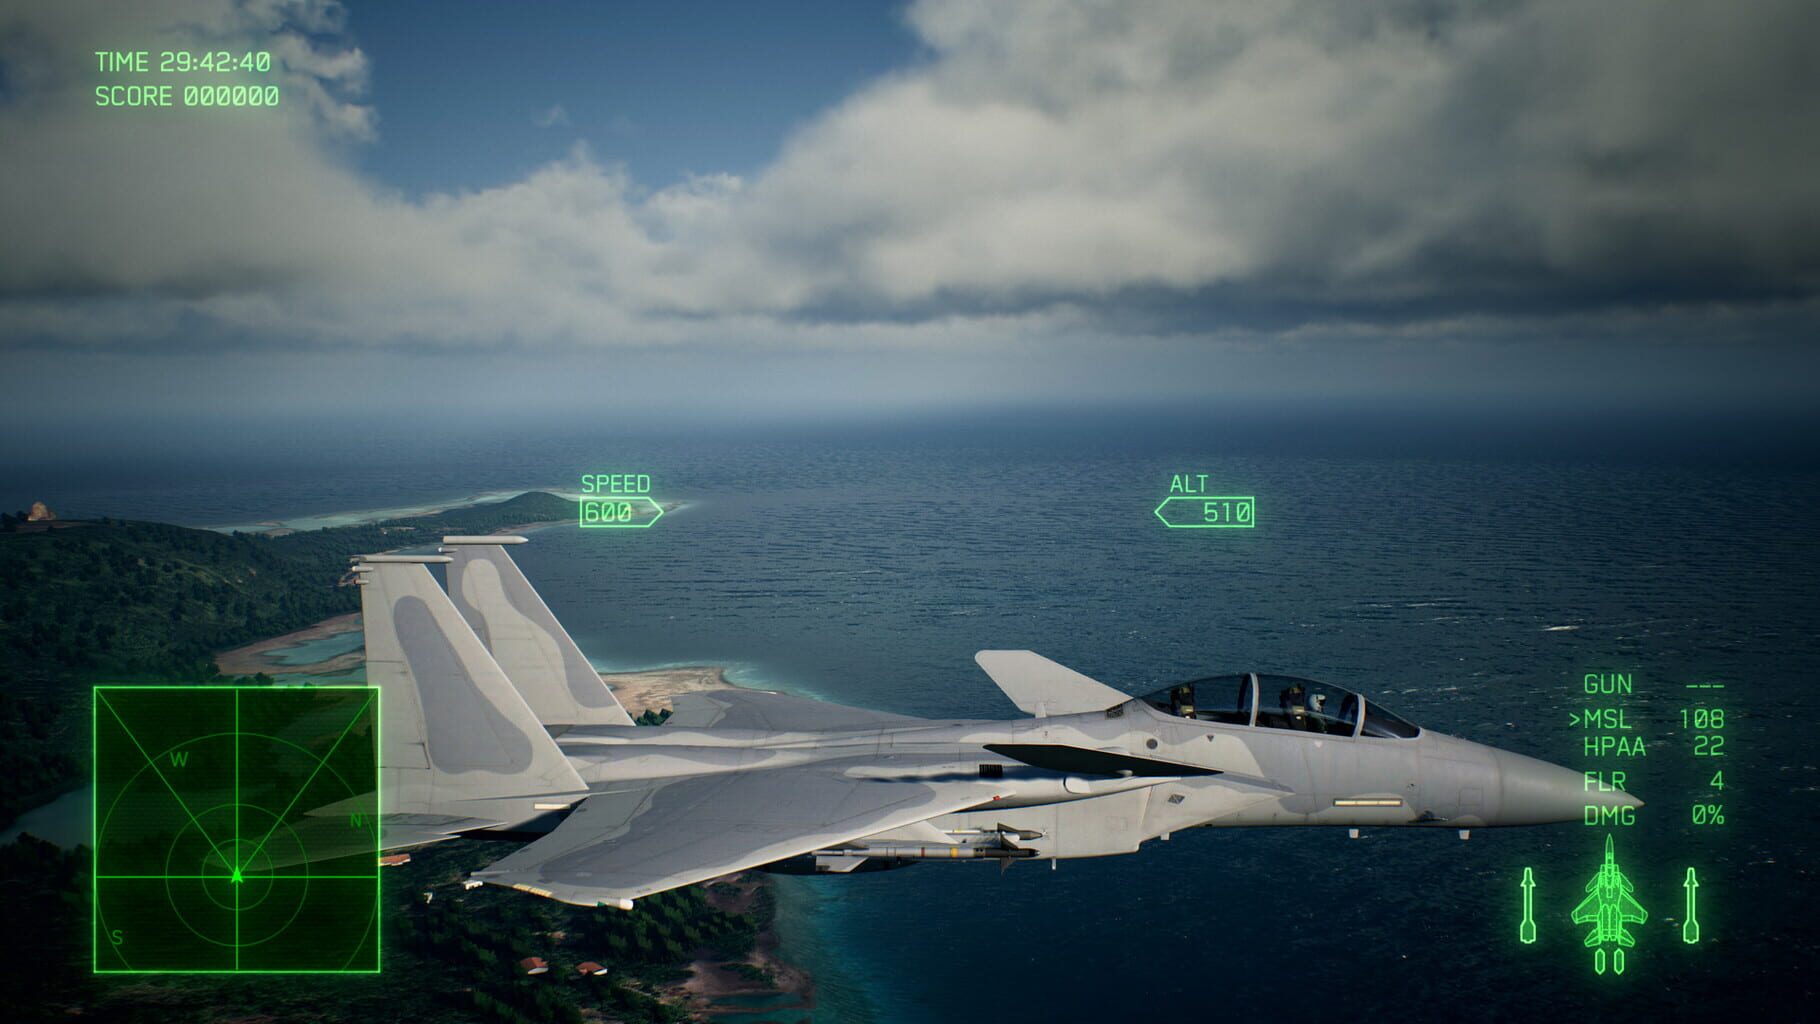 Ace Combat 7: Skies Unknown - Experimental Aircraft Series Image